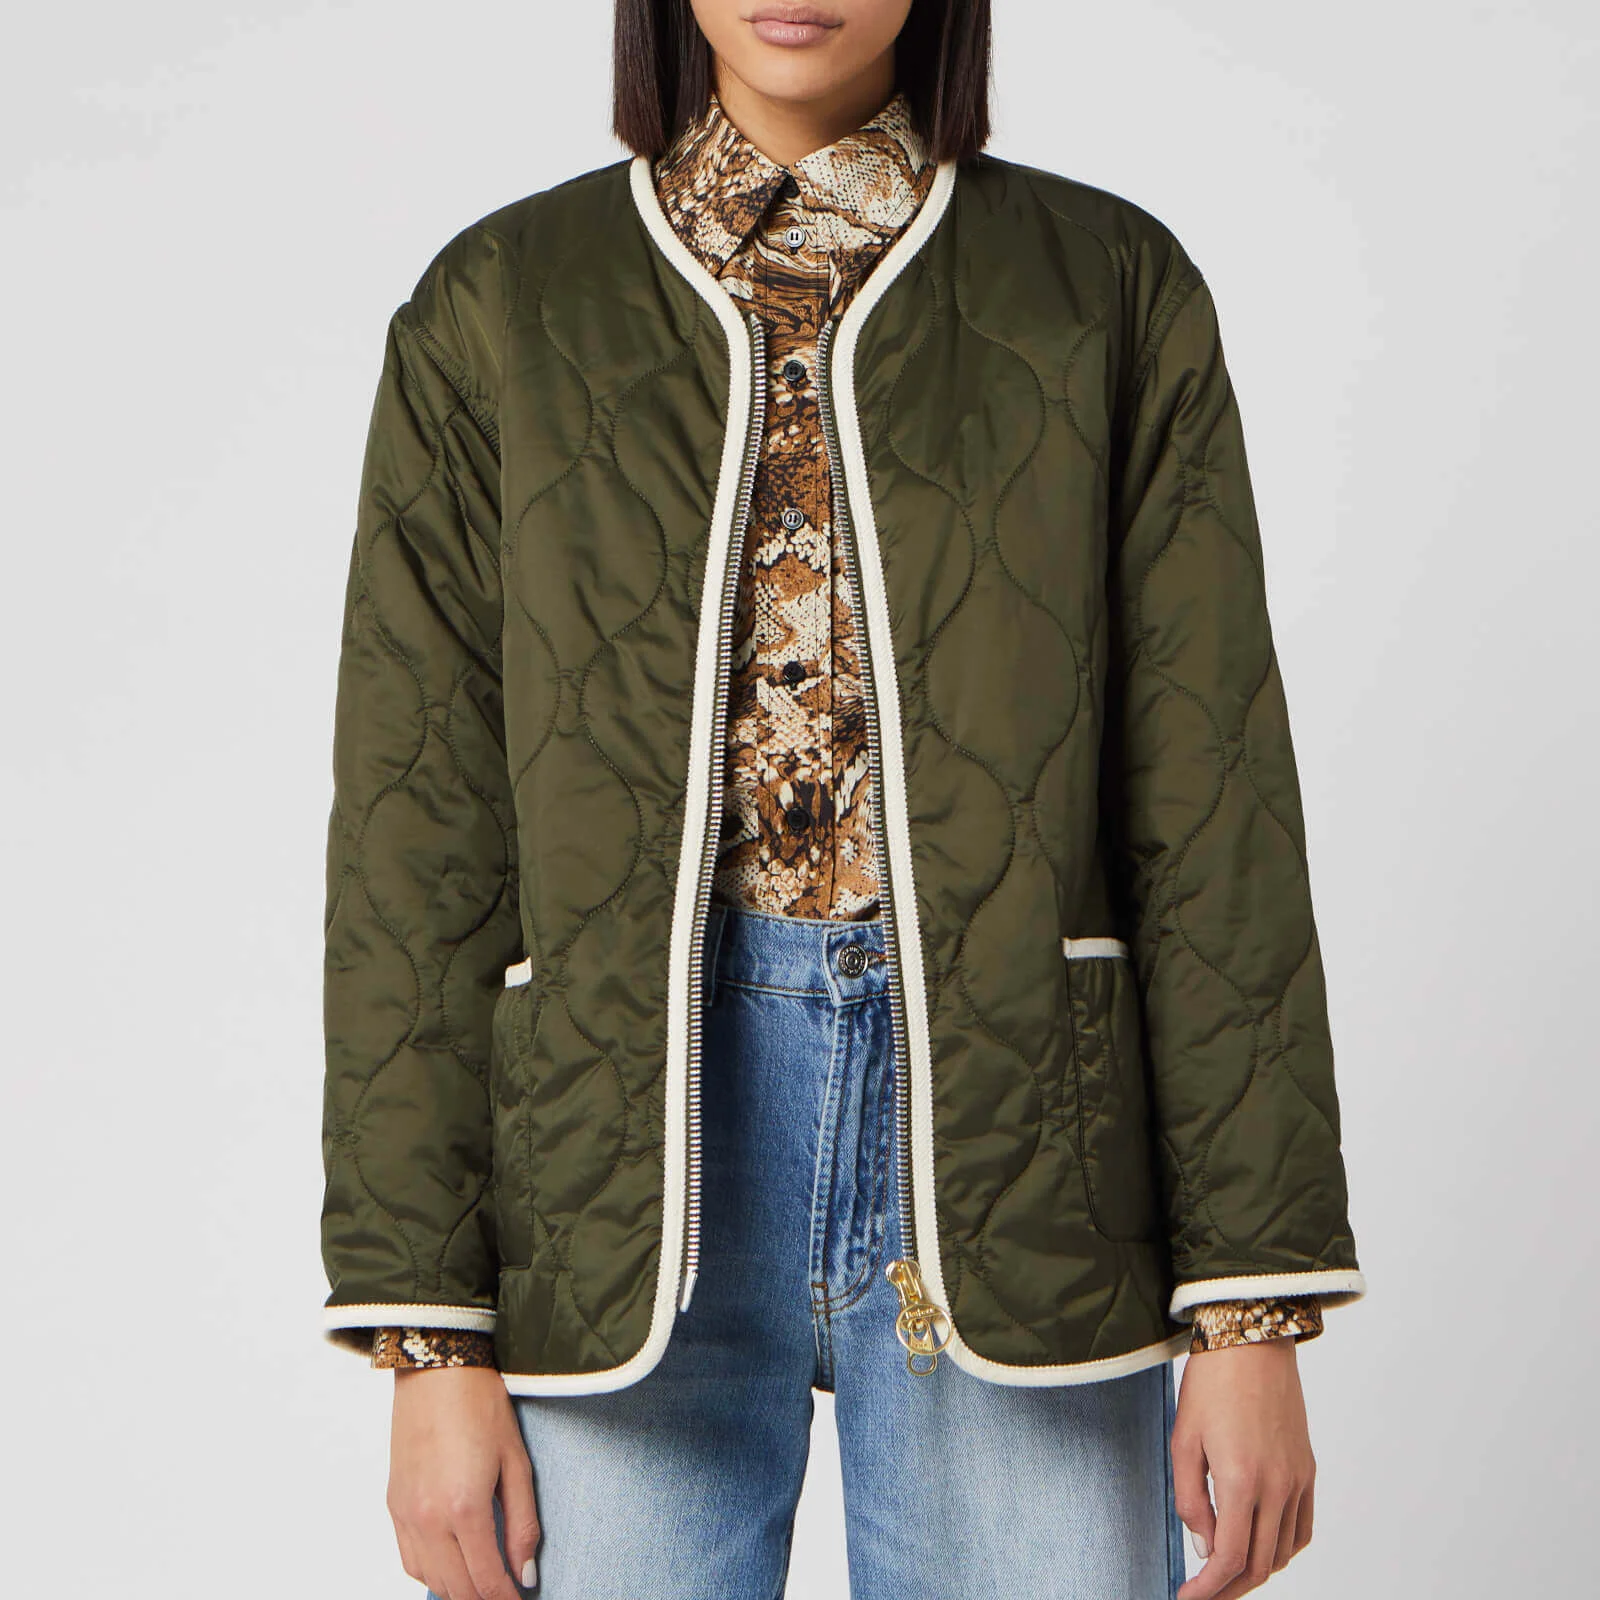 Barbour Women's Alexa Chung Darcy Quilt Jacket - Olive Image 1